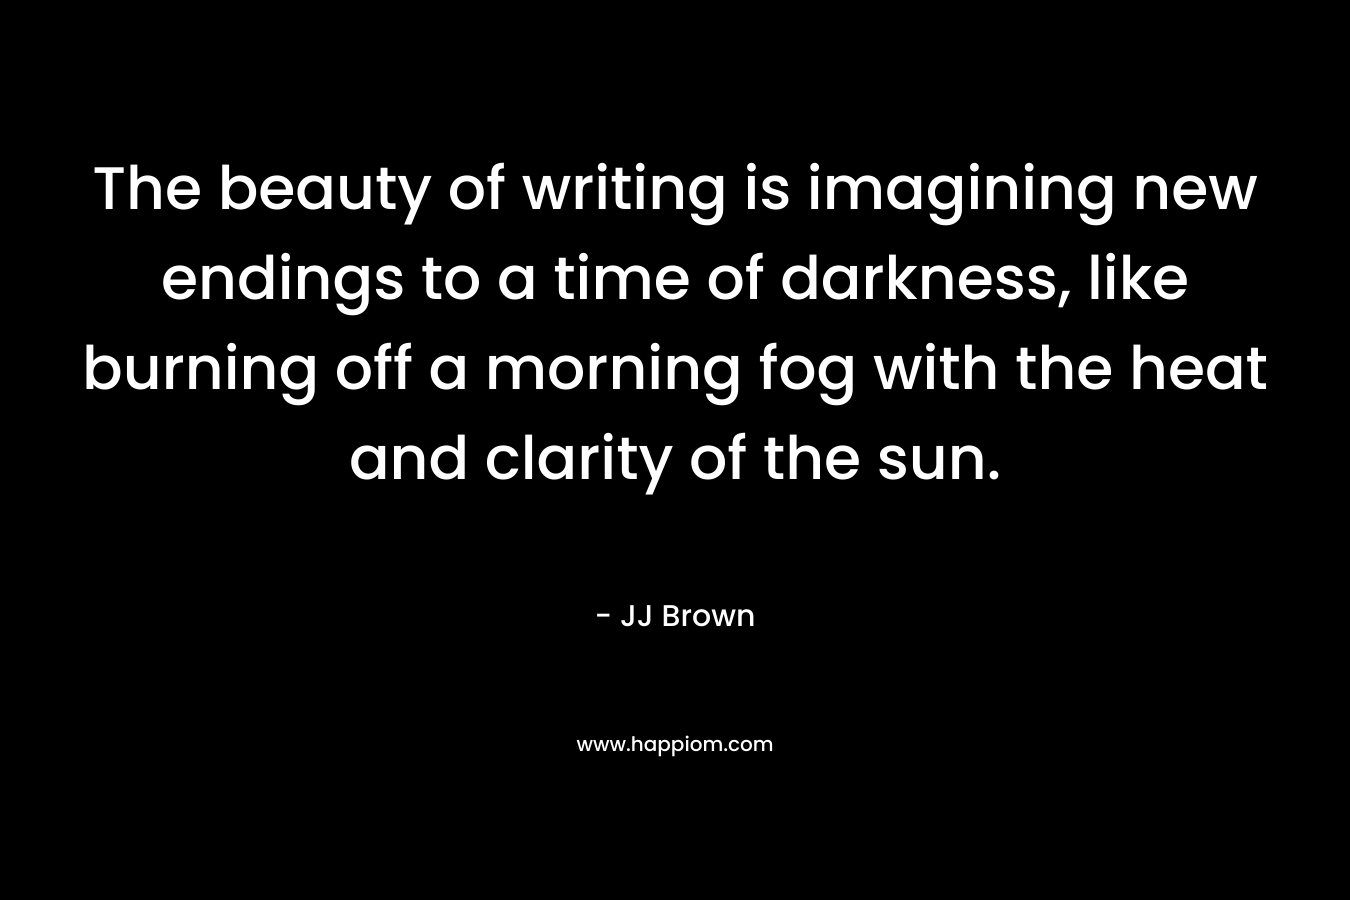 The beauty of writing is imagining new endings to a time of darkness, like burning off a morning fog with the heat and clarity of the sun. – JJ Brown